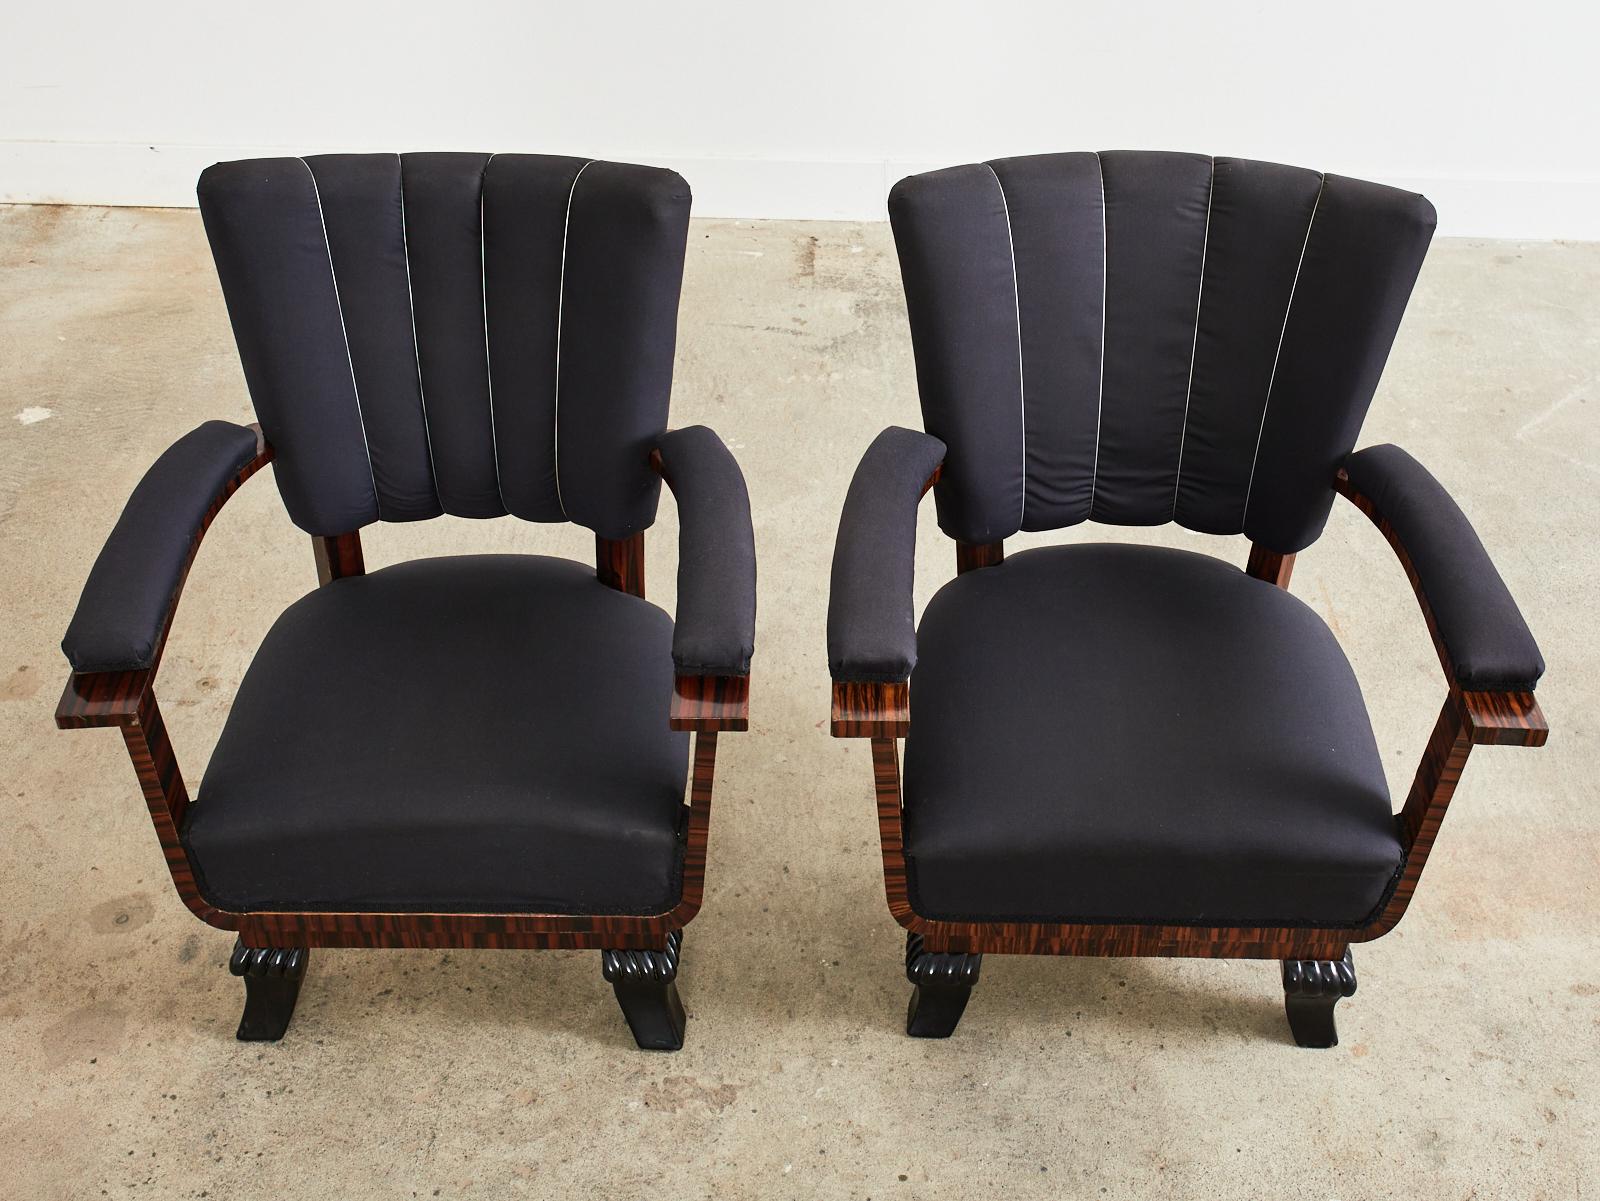 Pair of French Art Deco Macassar Club Chairs In Good Condition For Sale In Rio Vista, CA